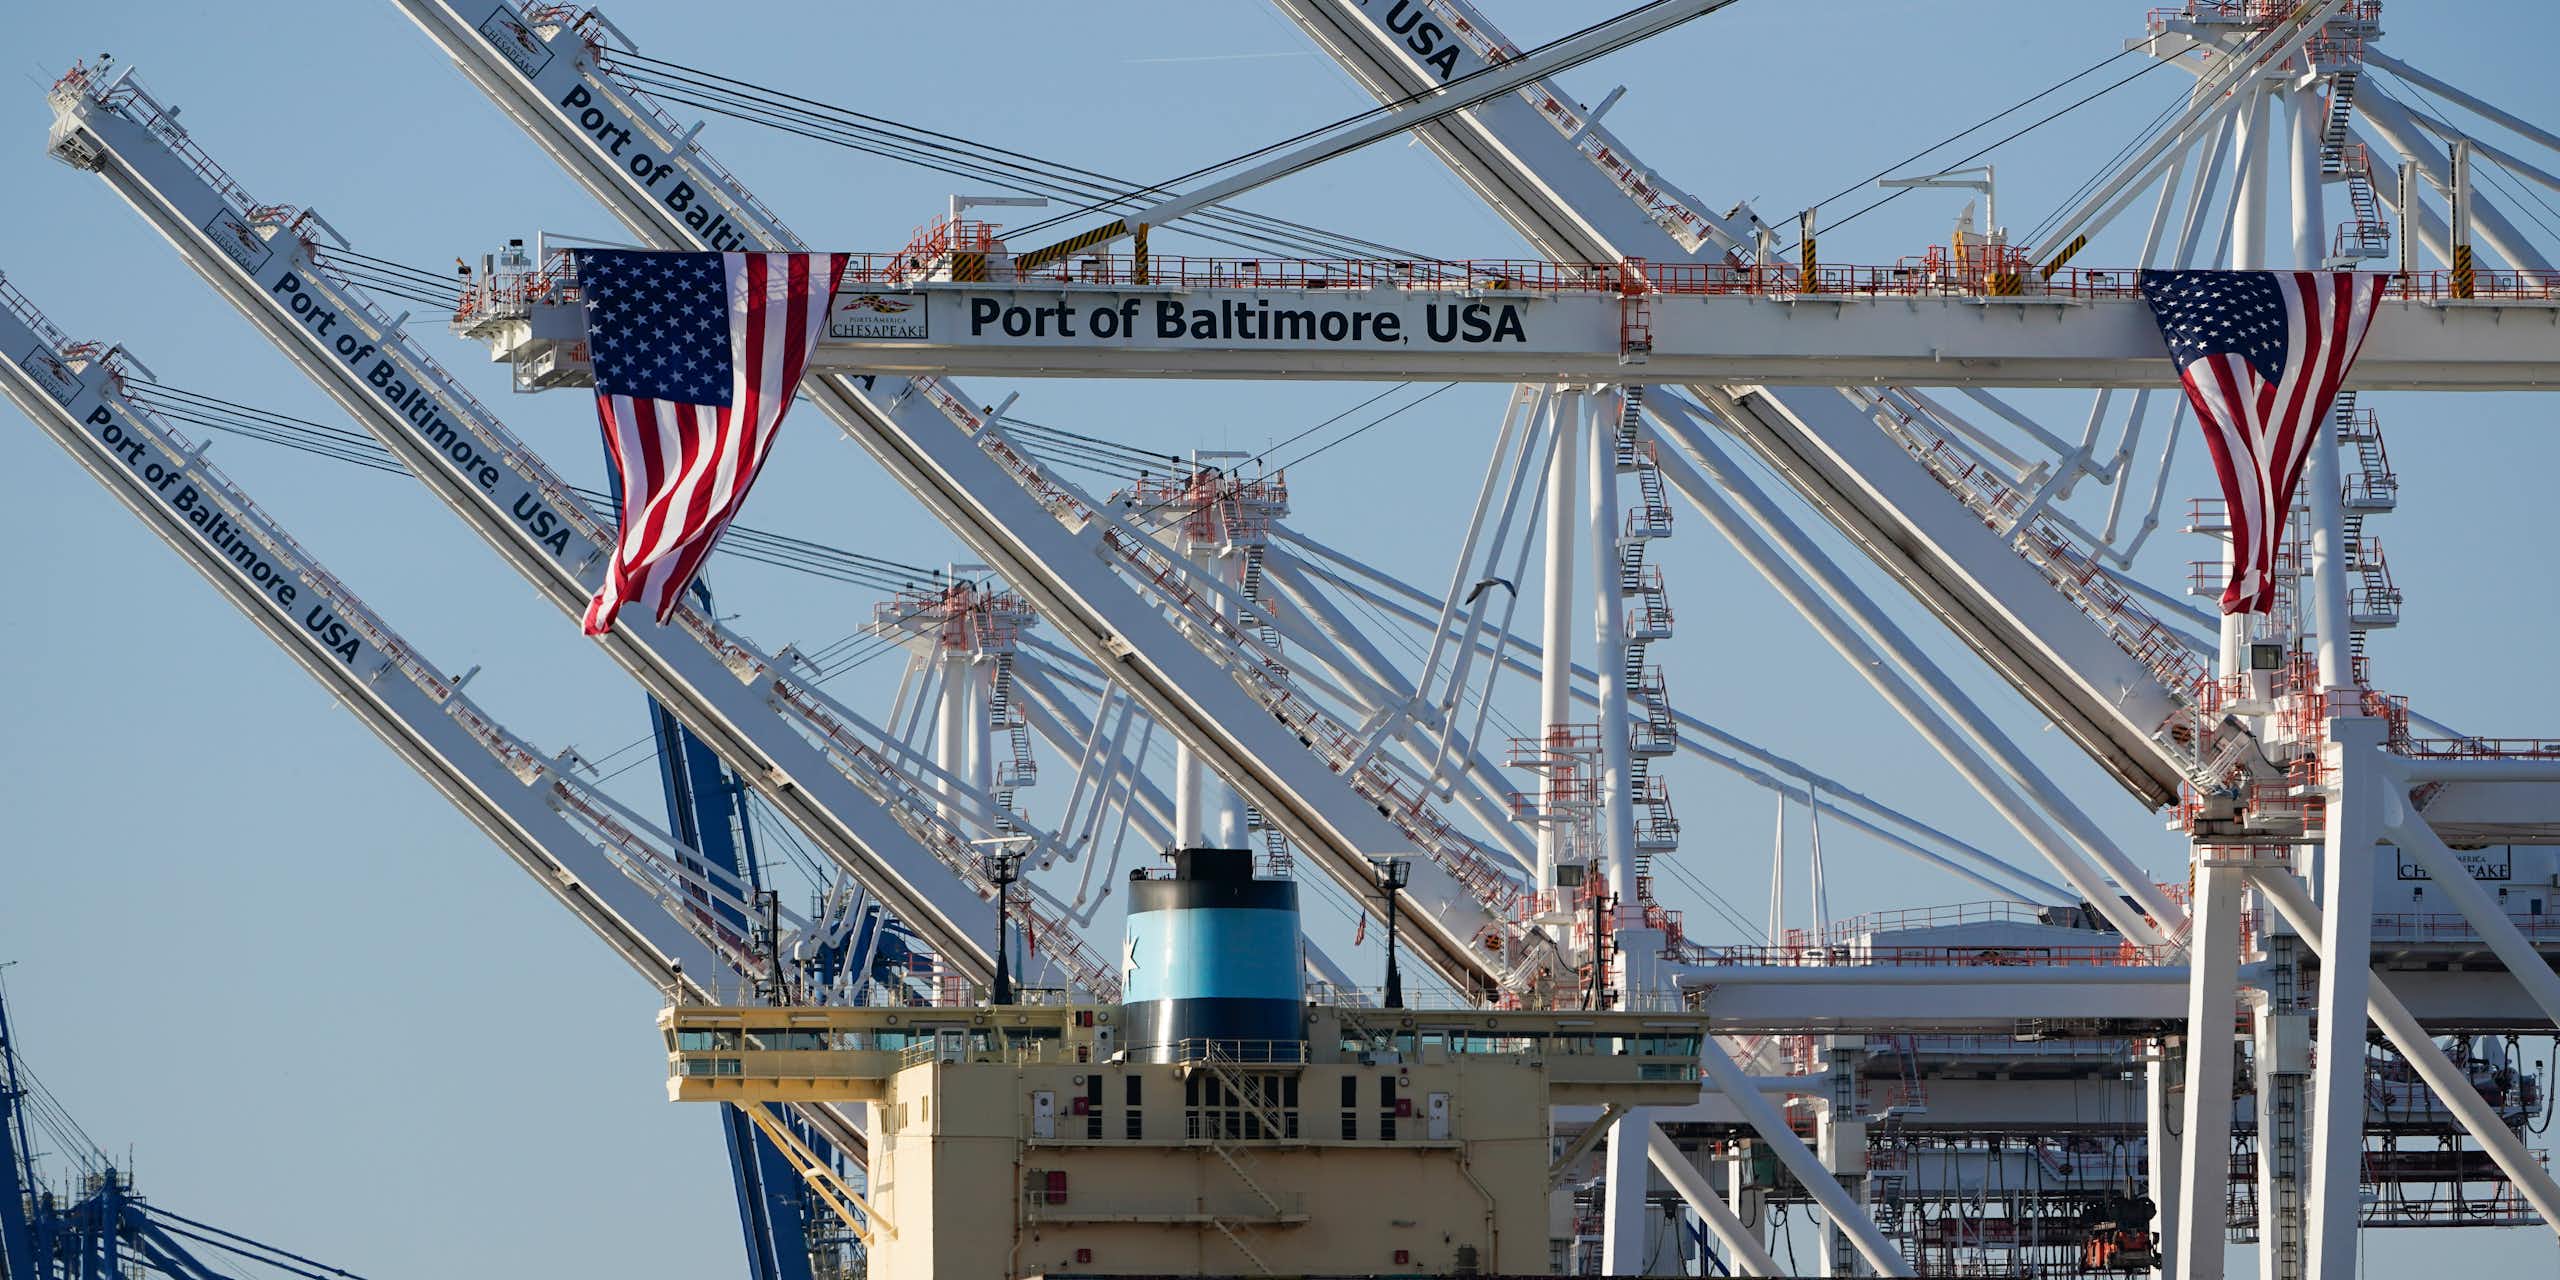 American flags hang off cranes with one reading Port of Baltimore USA.